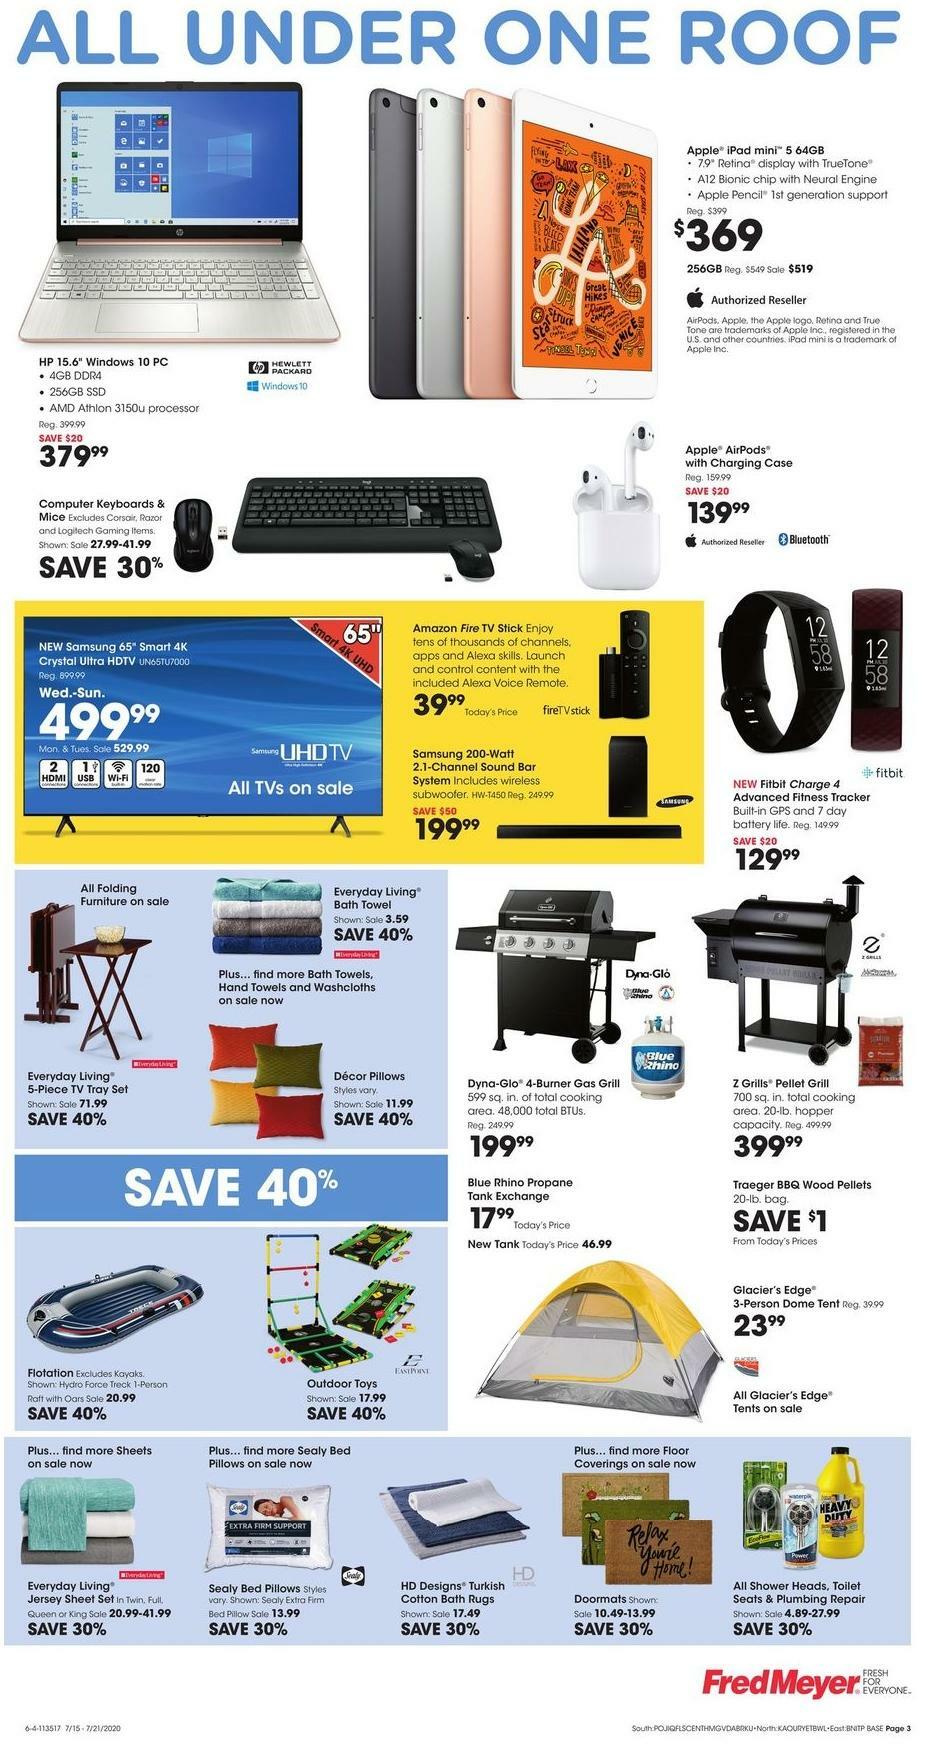 Fred Meyer General Merchandise Weekly Ad from July 15